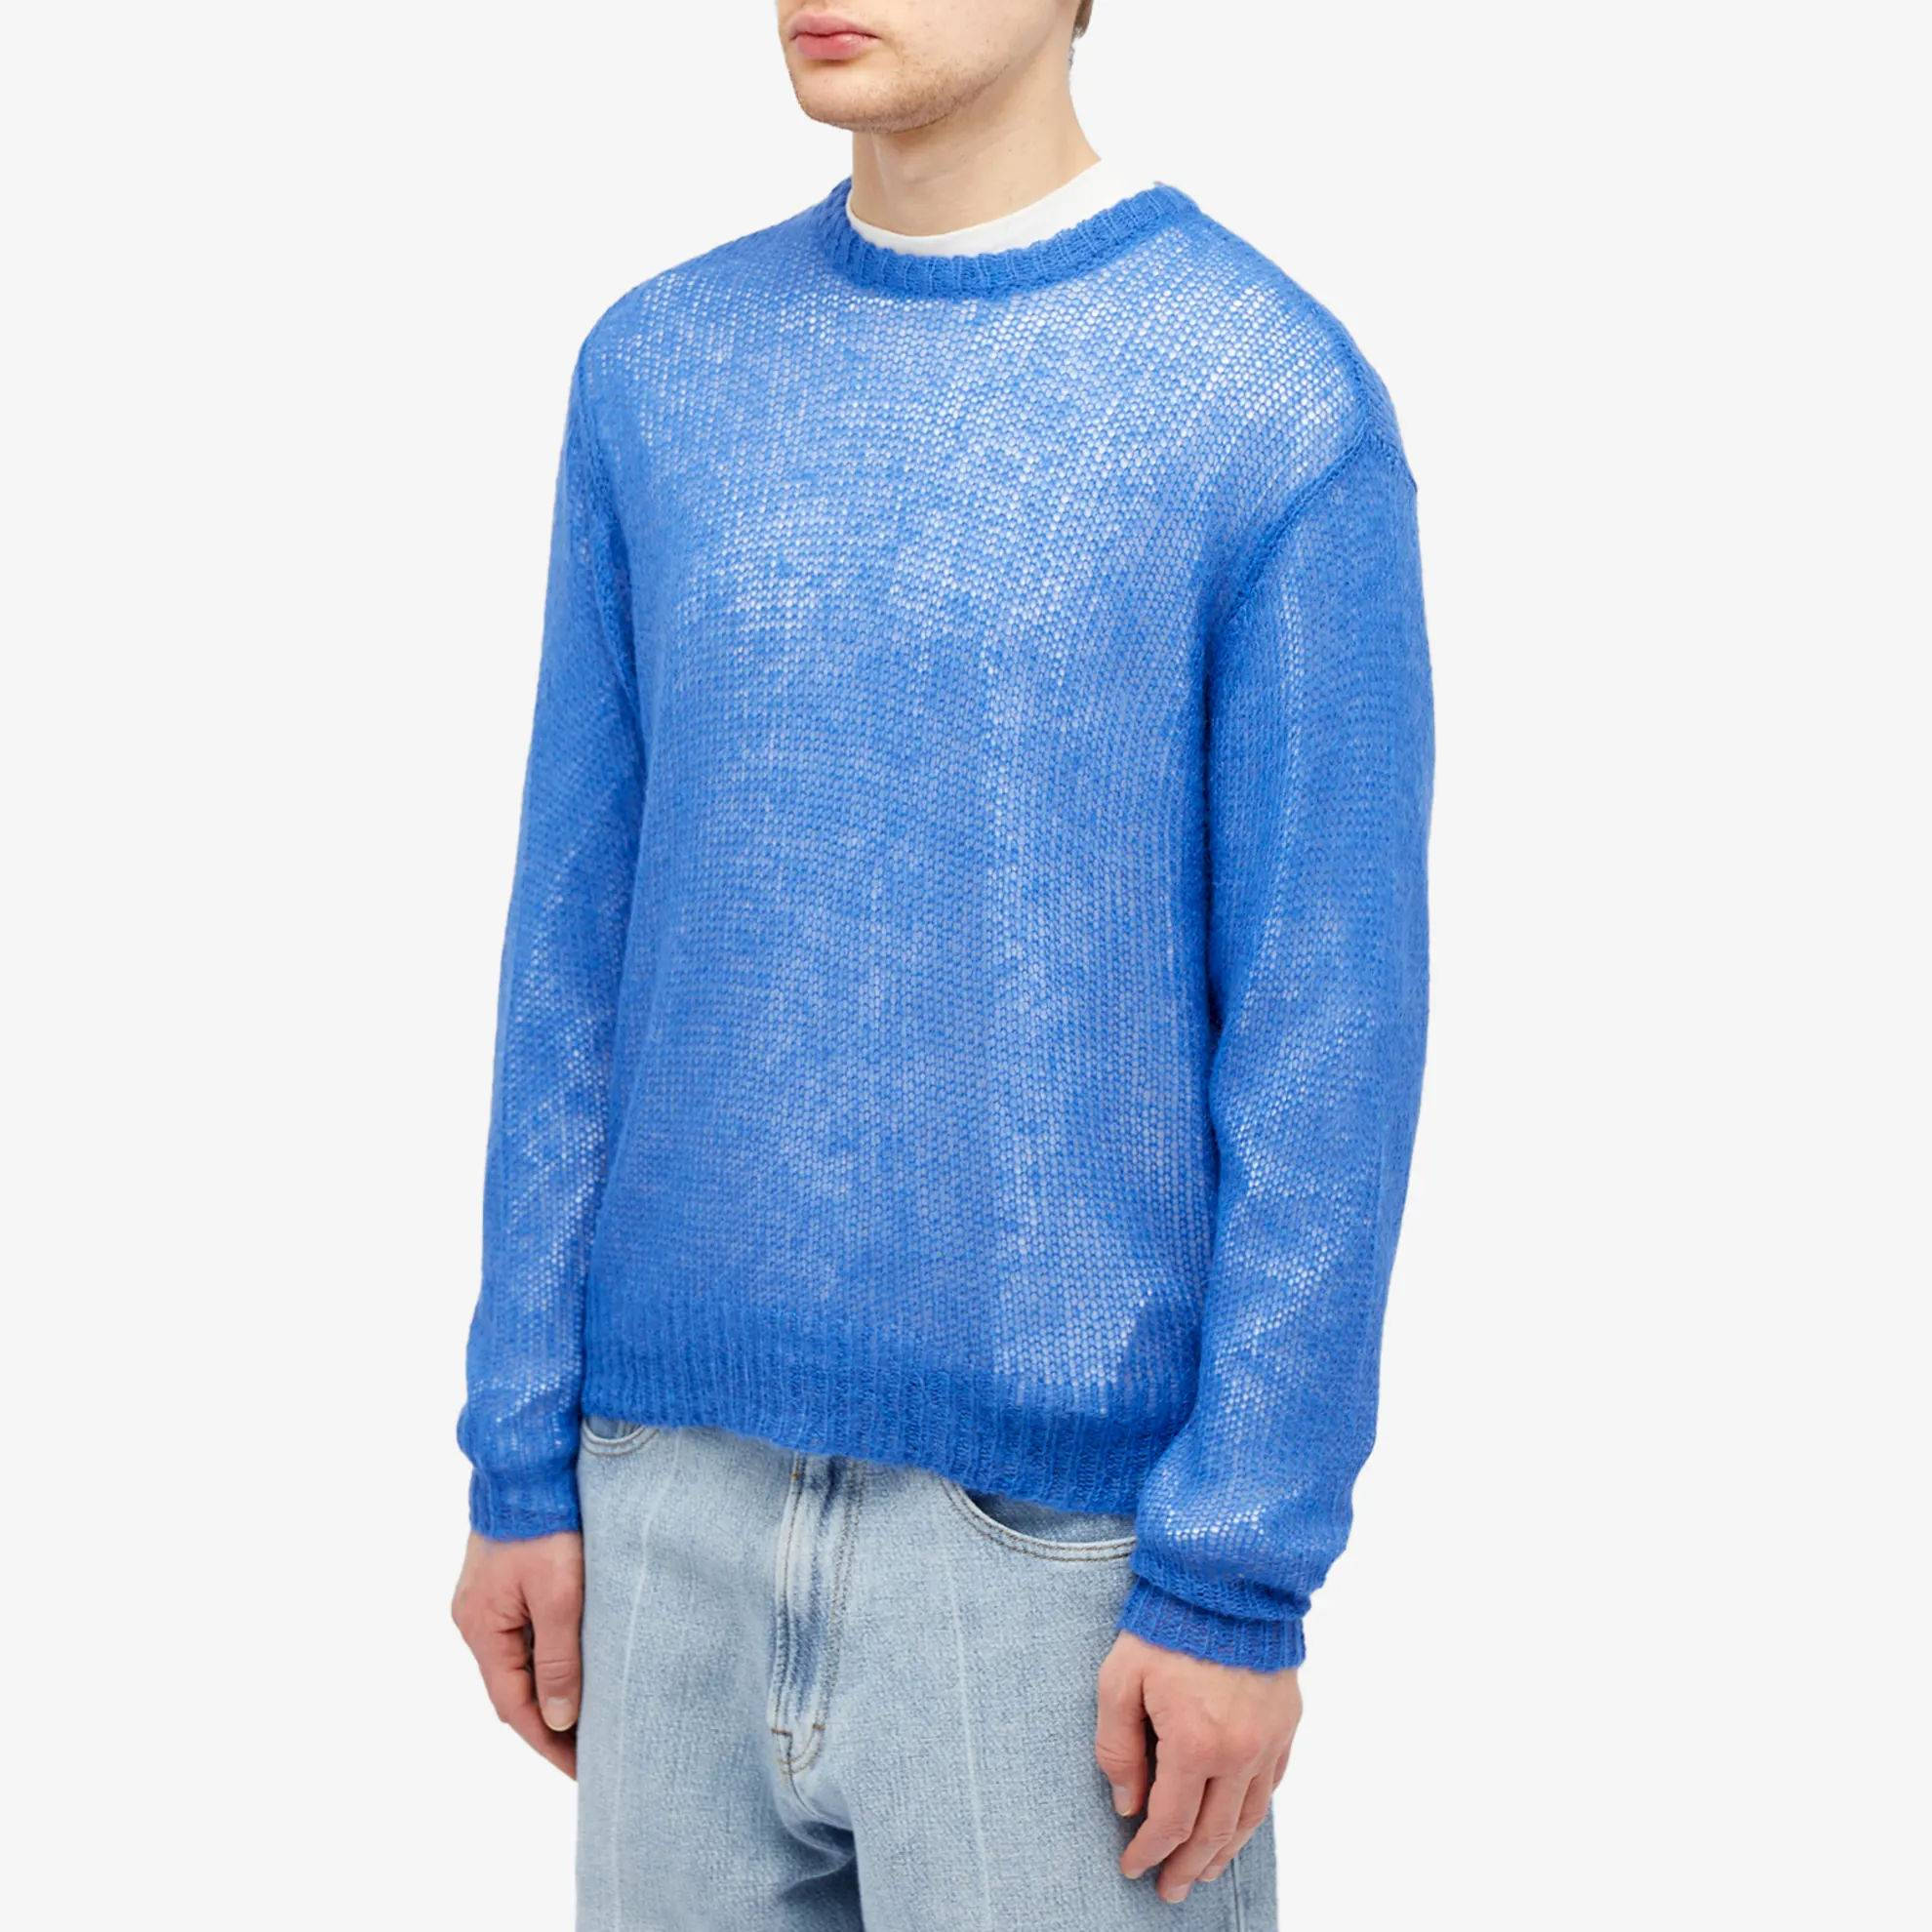 Stüssy S Loose Knit Sweater | Where To Buy | 117205-blac | The